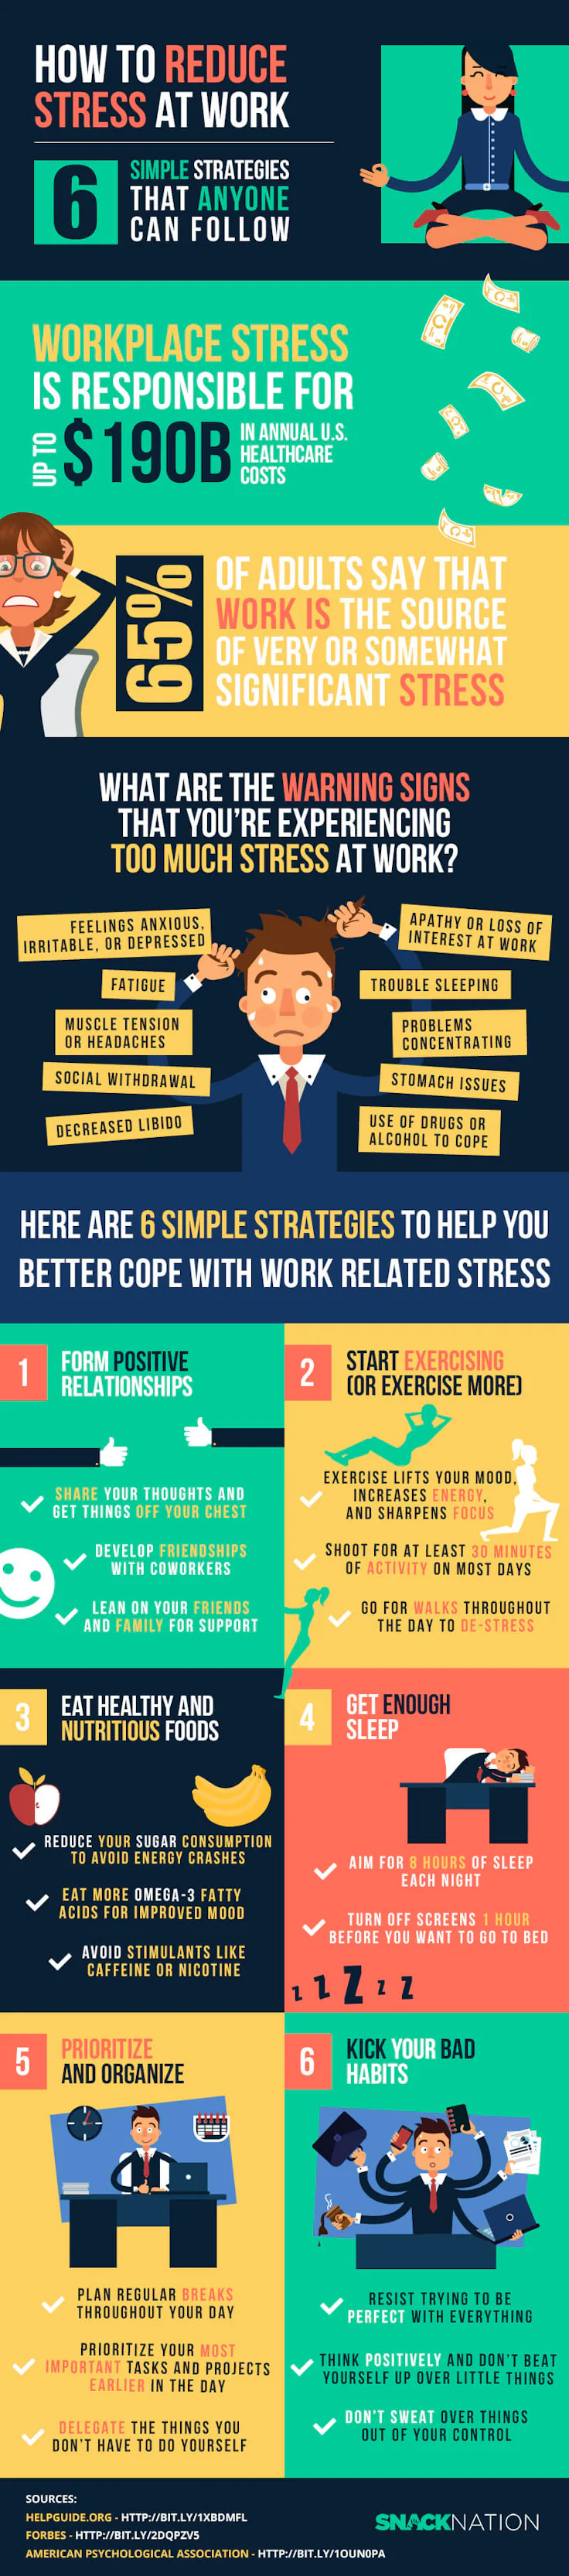 how to reduce stress at work